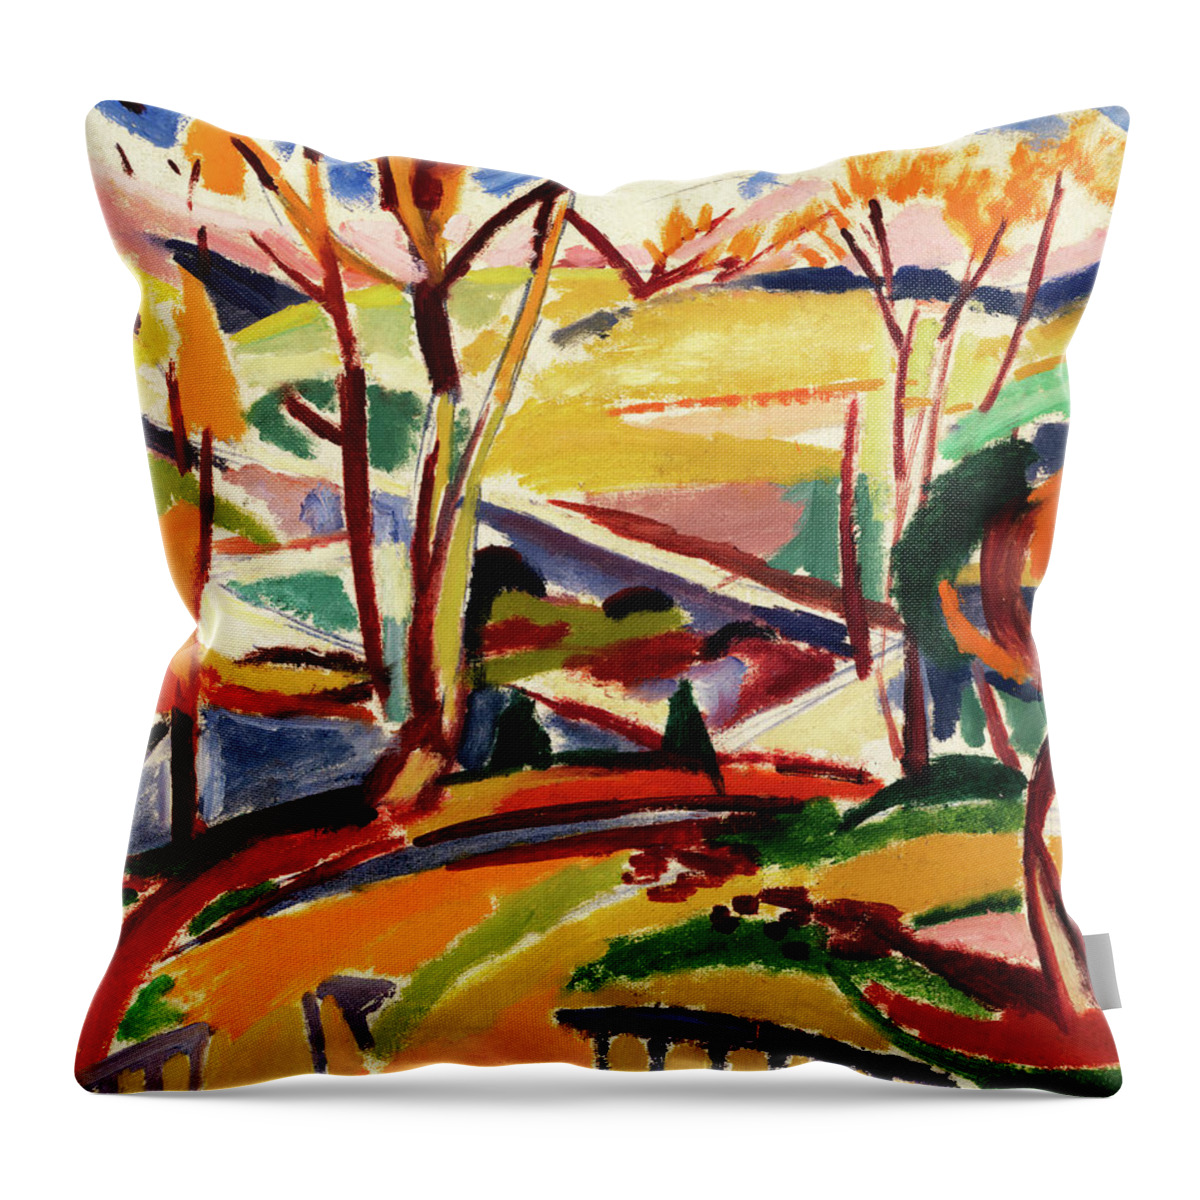 Museum Throw Pillow featuring the painting Valley Falls I by Henry Lyman Sayen